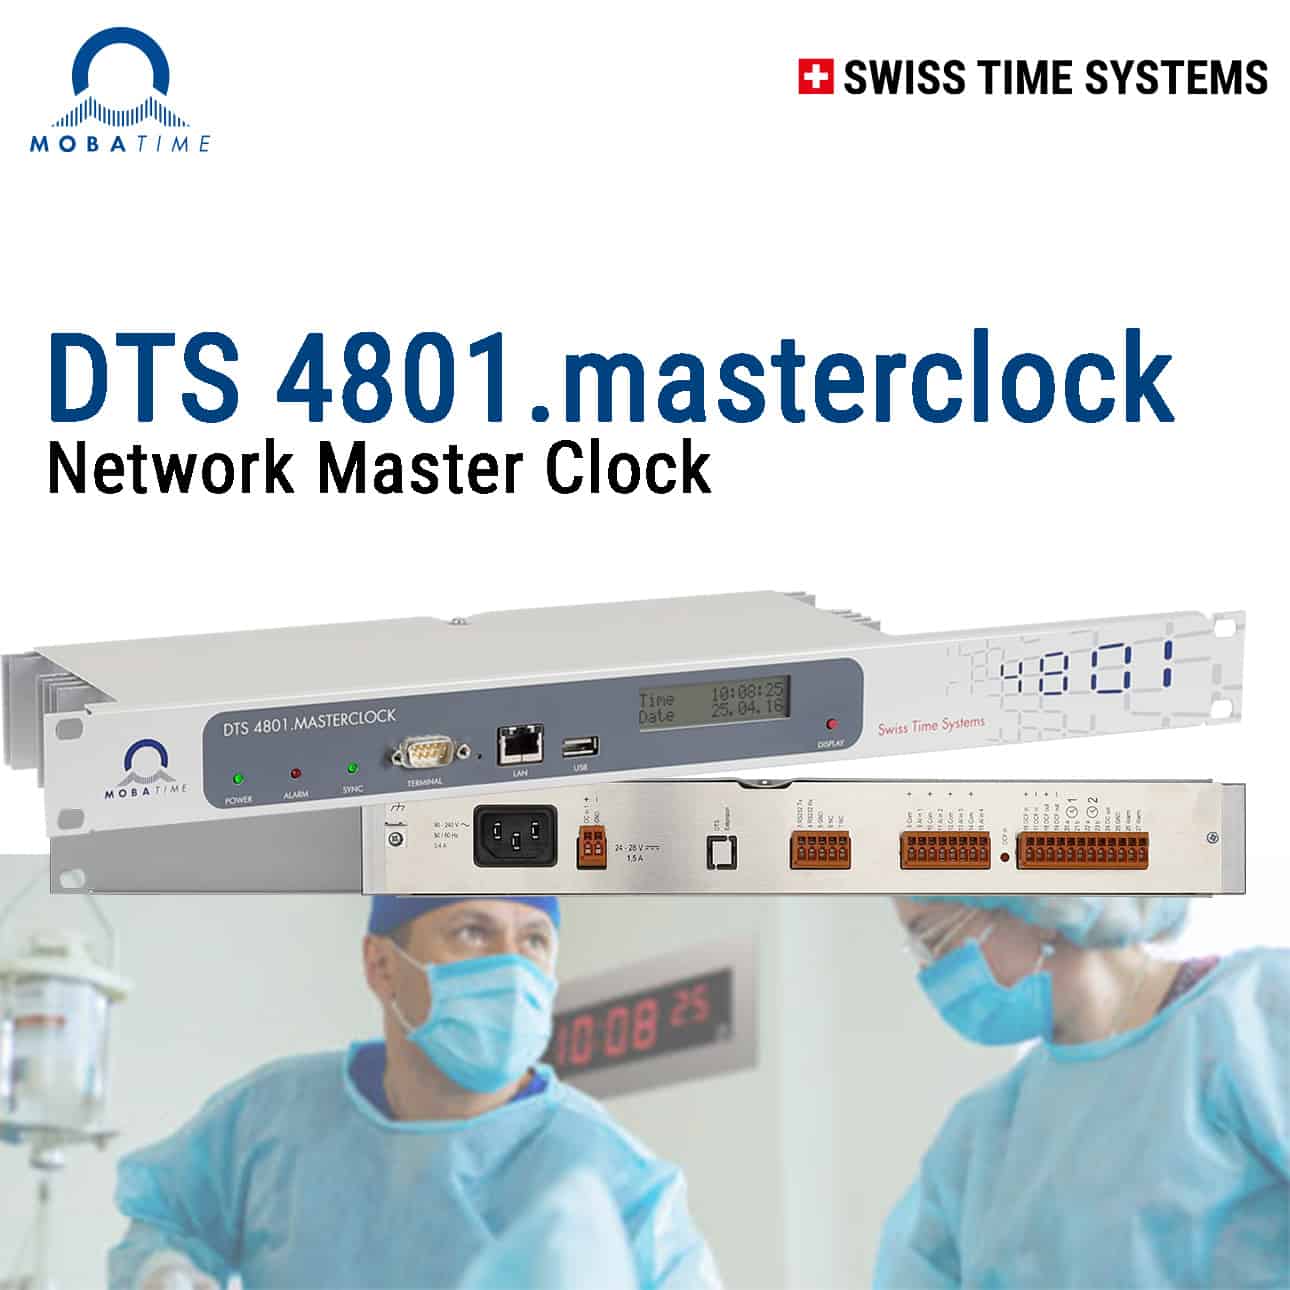 DTS 4801.masterclock - 1 device for network and clock synchronization